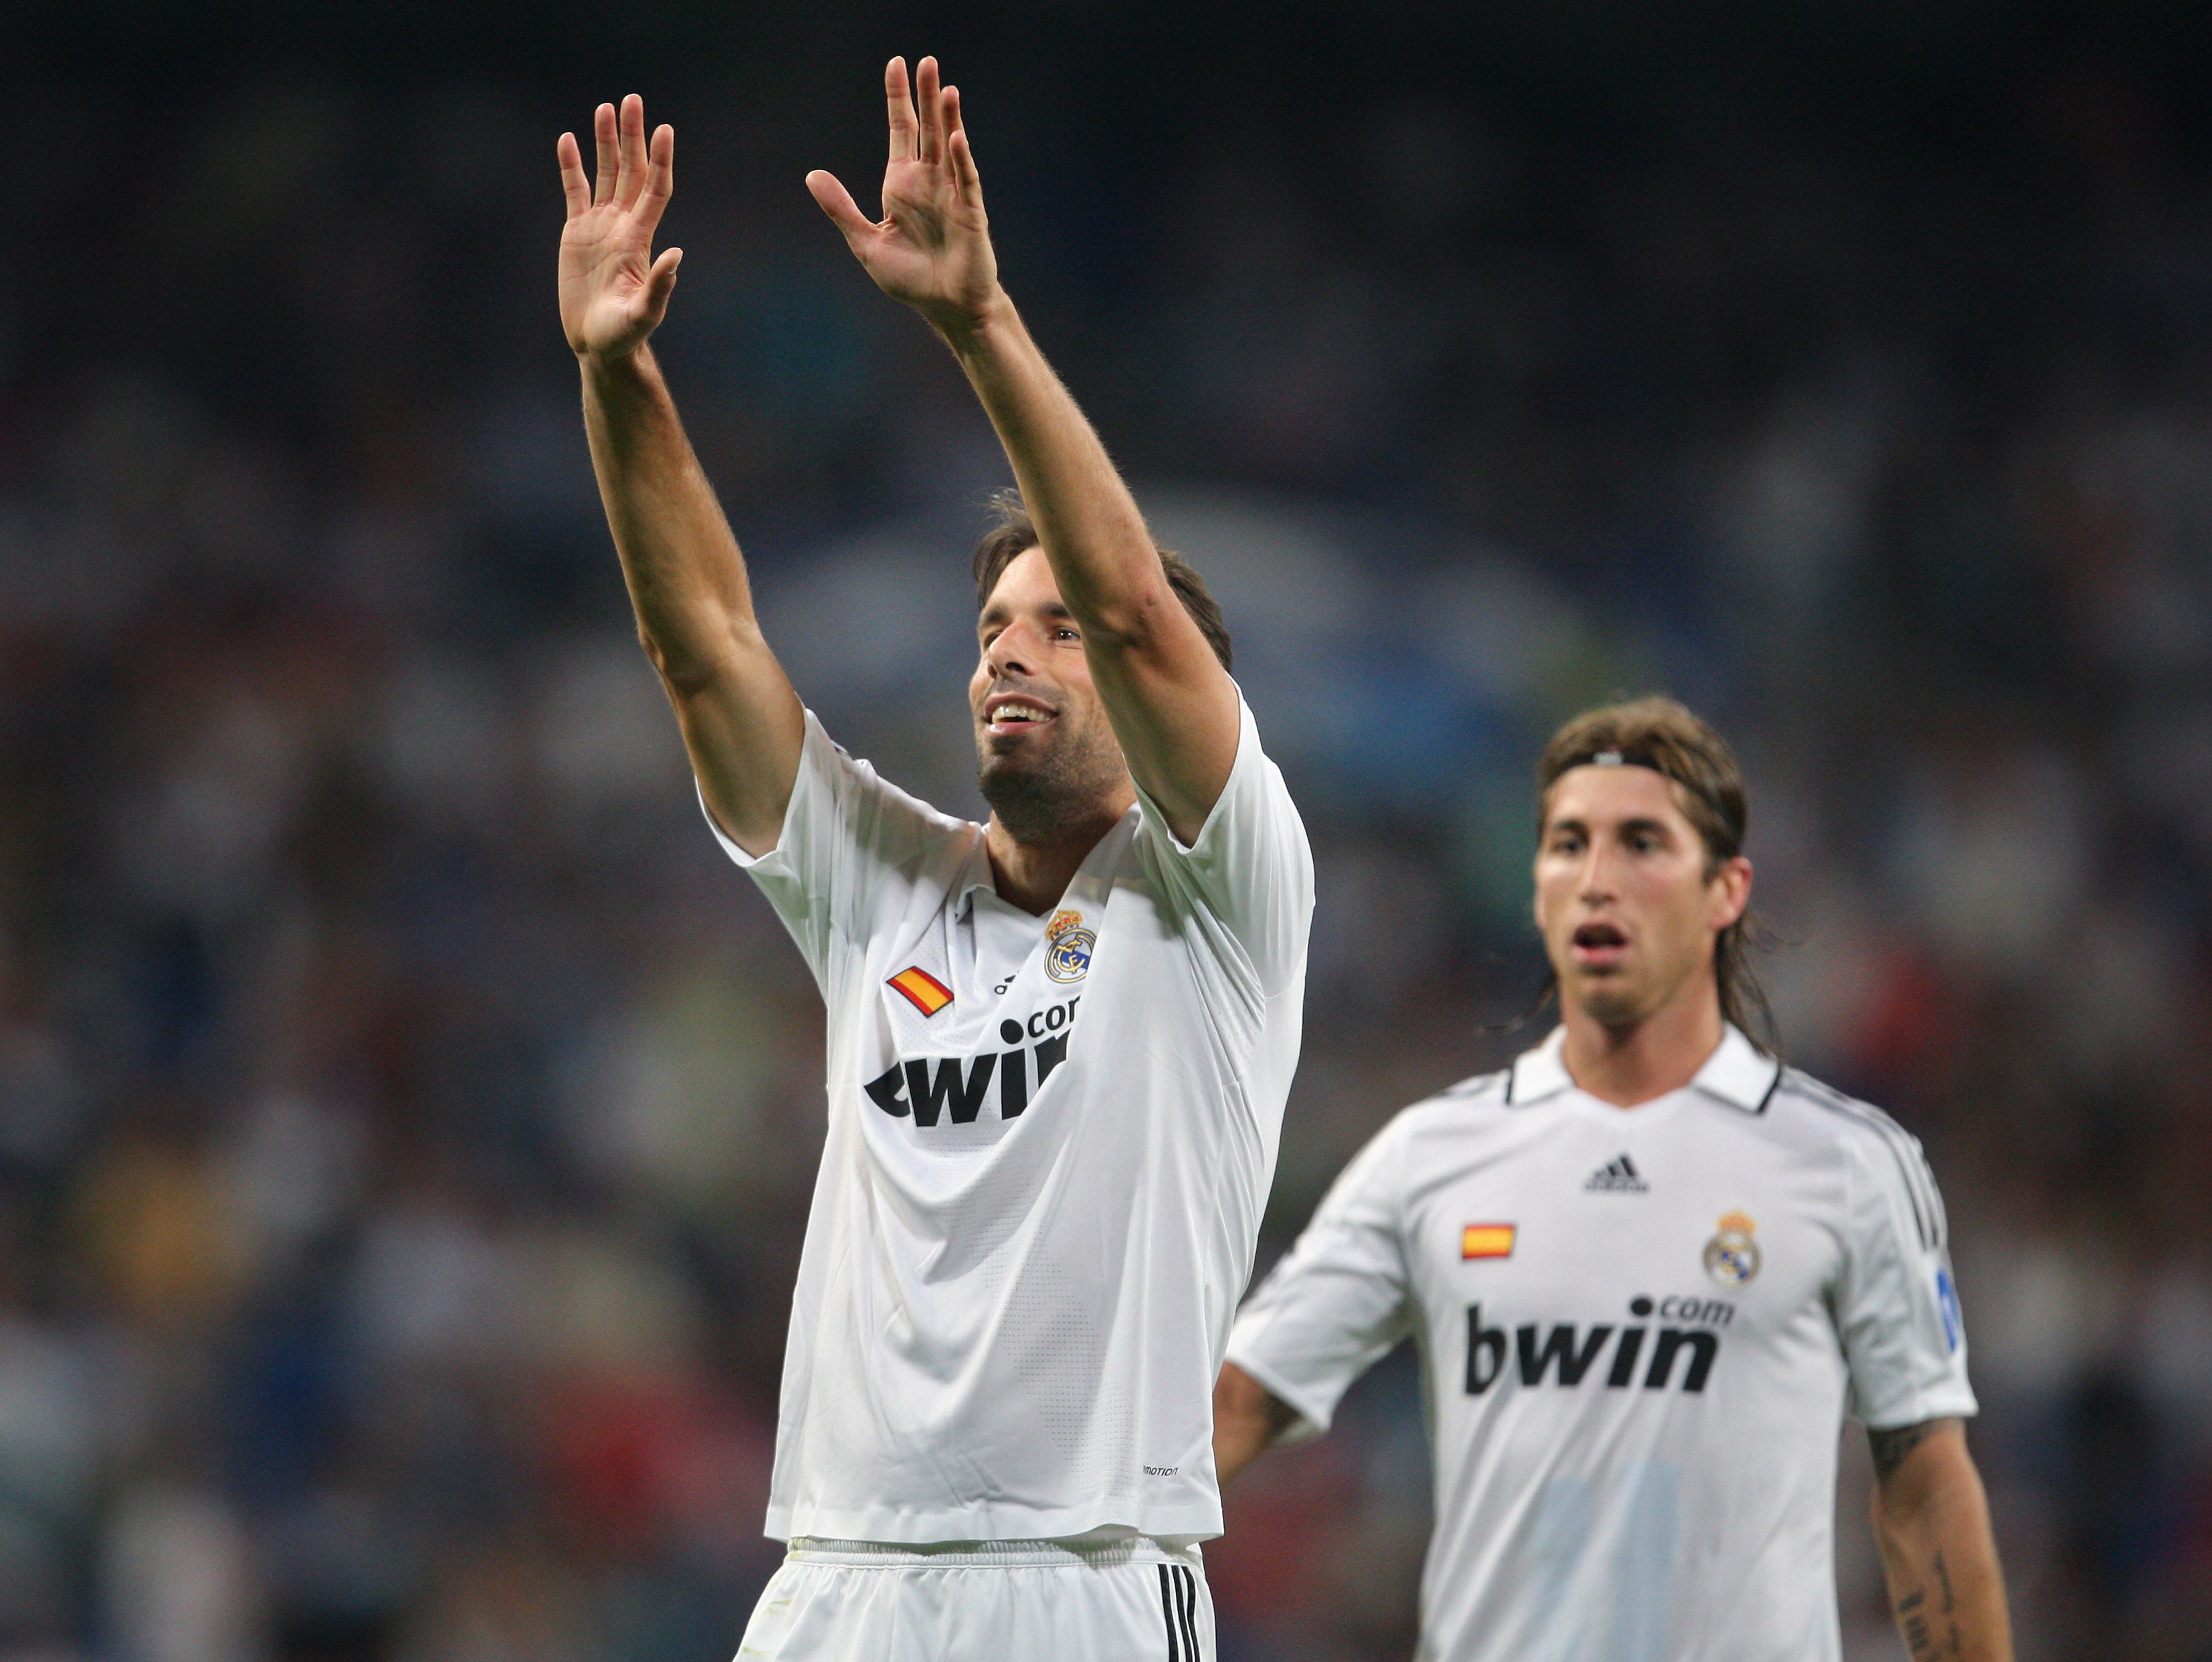 MADRID, SPAIN - SEPTEMBER 17:  Ruud van Nistelrooy of Real Madrid celebrates scoring the second goal backdropped by his teammate Sergio Ramos during the UEFA Champions League Group H match between Real Madrid and BATE Borisov at the Santiago Bernabeu stad